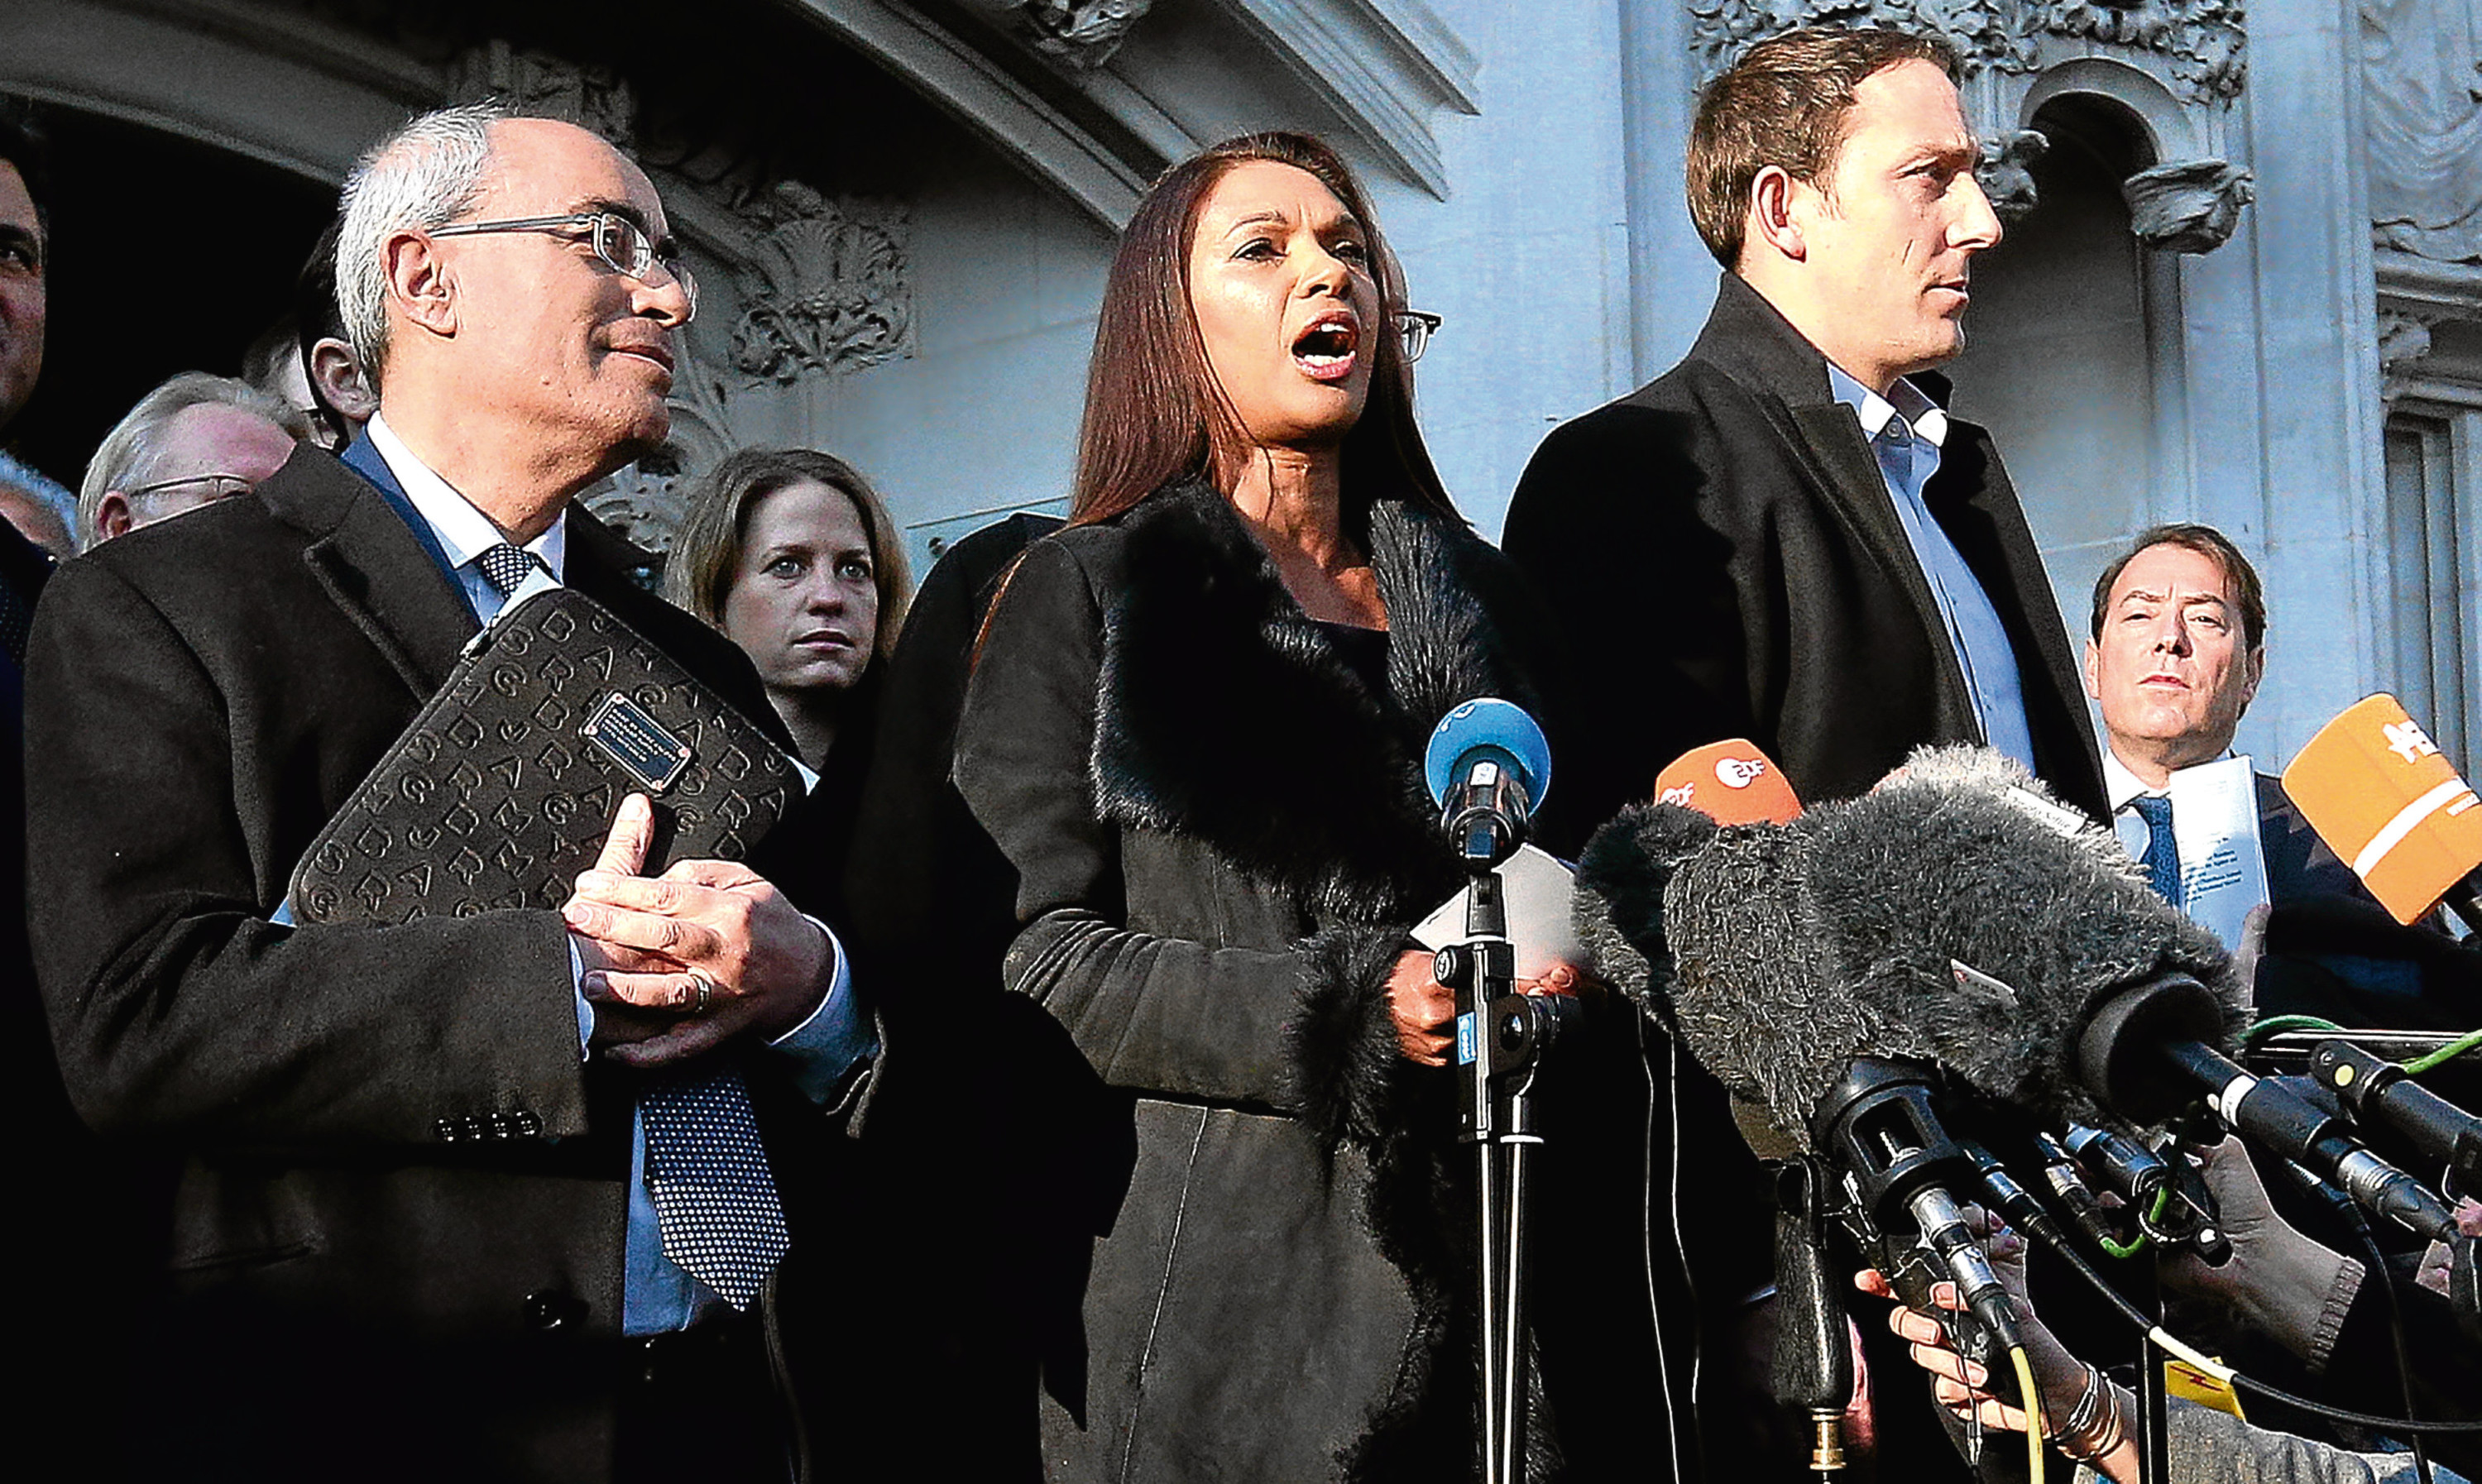 Anti-Brexit campaigner Gina Miller speaks outside the Supreme Court in London following its majority ruling against the Government.